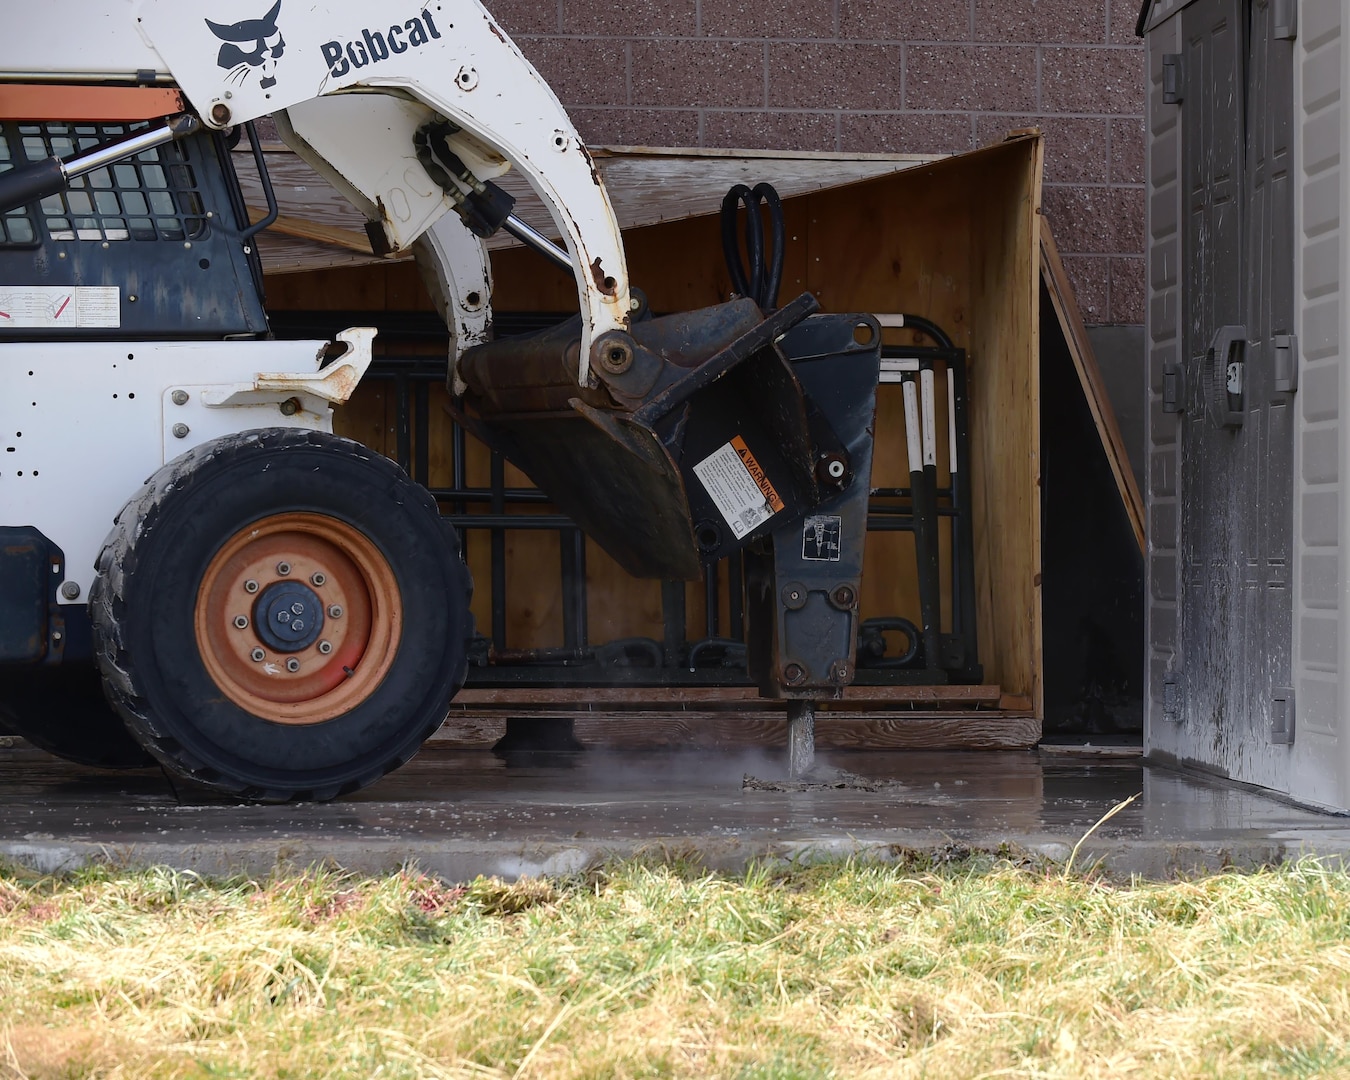 A Bobcat machine with a hydraulic attachment breaks through concrete Feb. 17, 2017 on Buckley Air Force Base, Colo. These machines are operated solely by trained members of the 460th Civil Engineering Squadron. (U.S. Air Force photo by Airman 1st Class Jessica A. Huggins/Released)